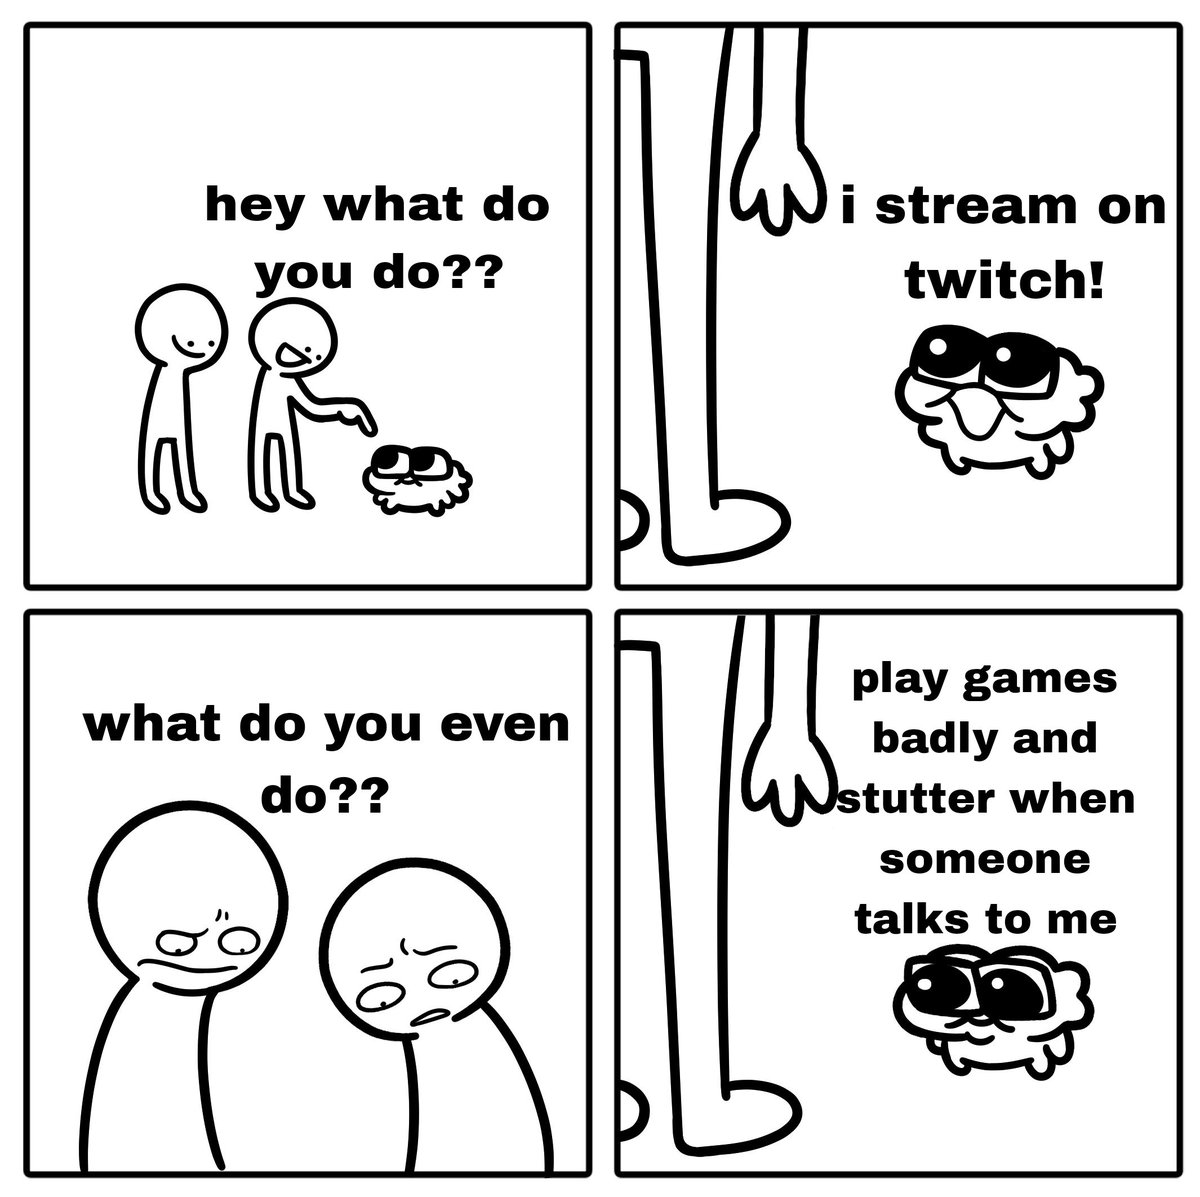 Anyone else relate to this or is it just me??? #TwitchStreamers #dumb